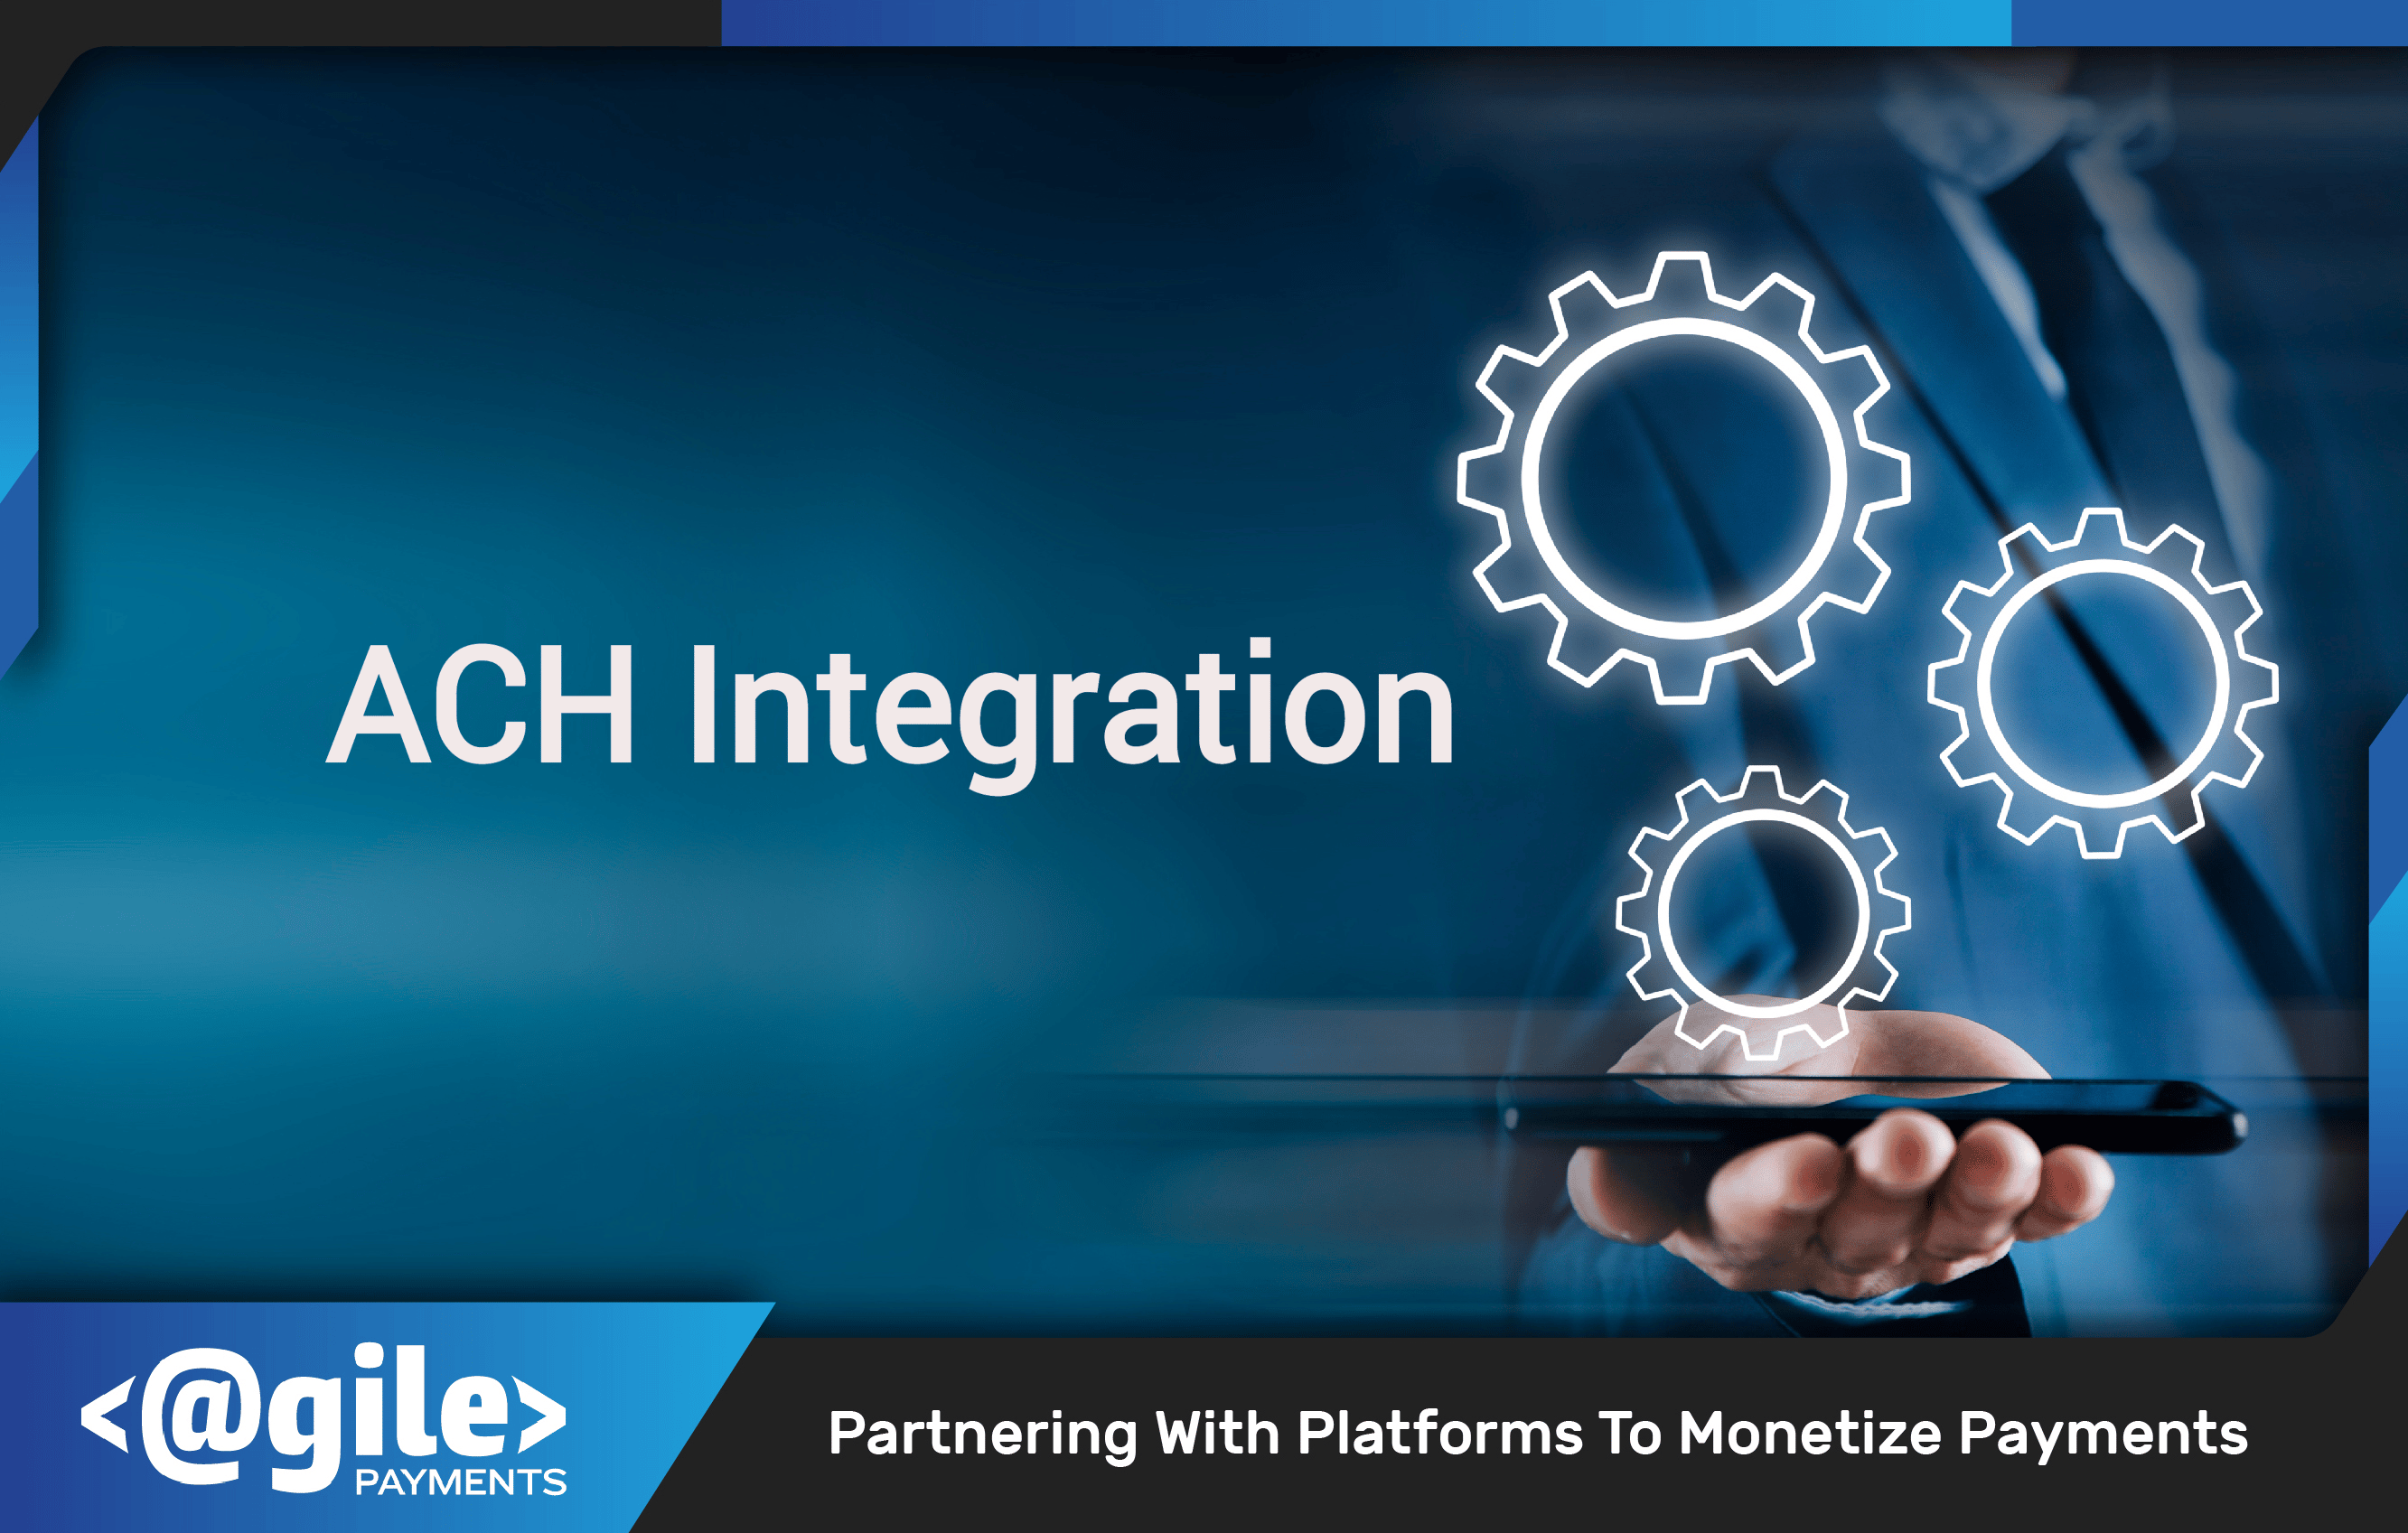 ACH Integration from Agile Payments